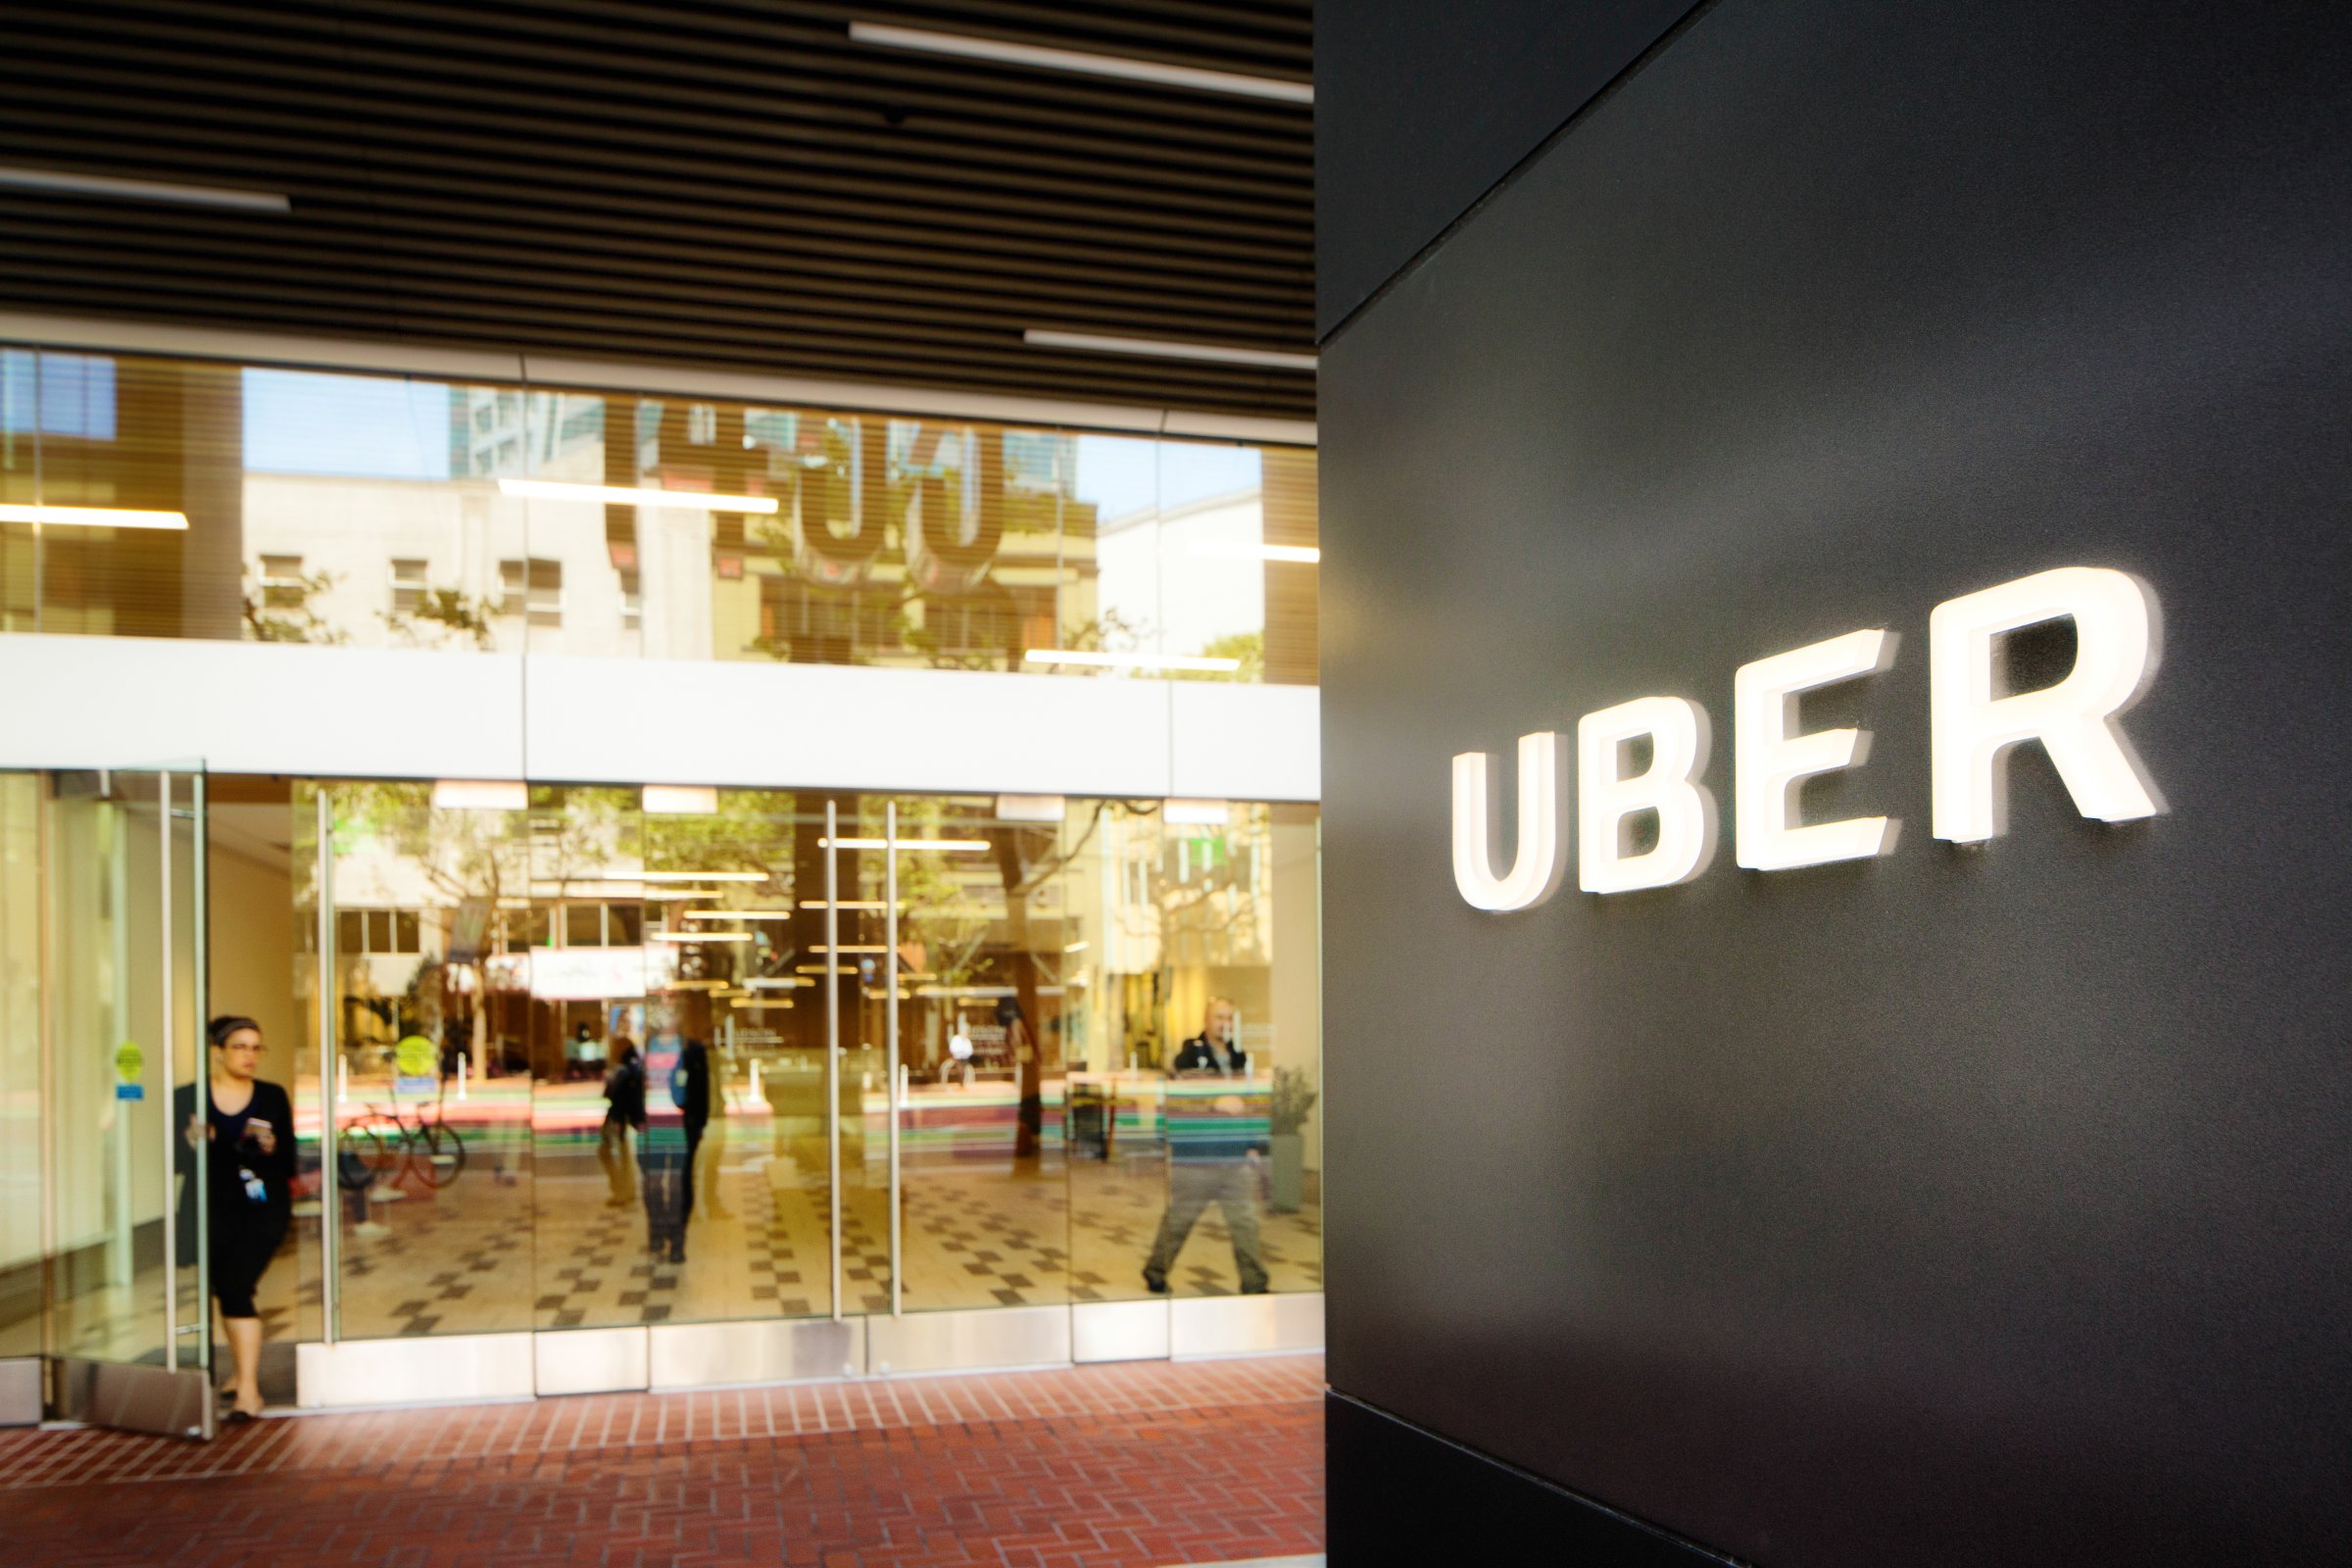 Uber headquarters entrance in San Francisco with sign